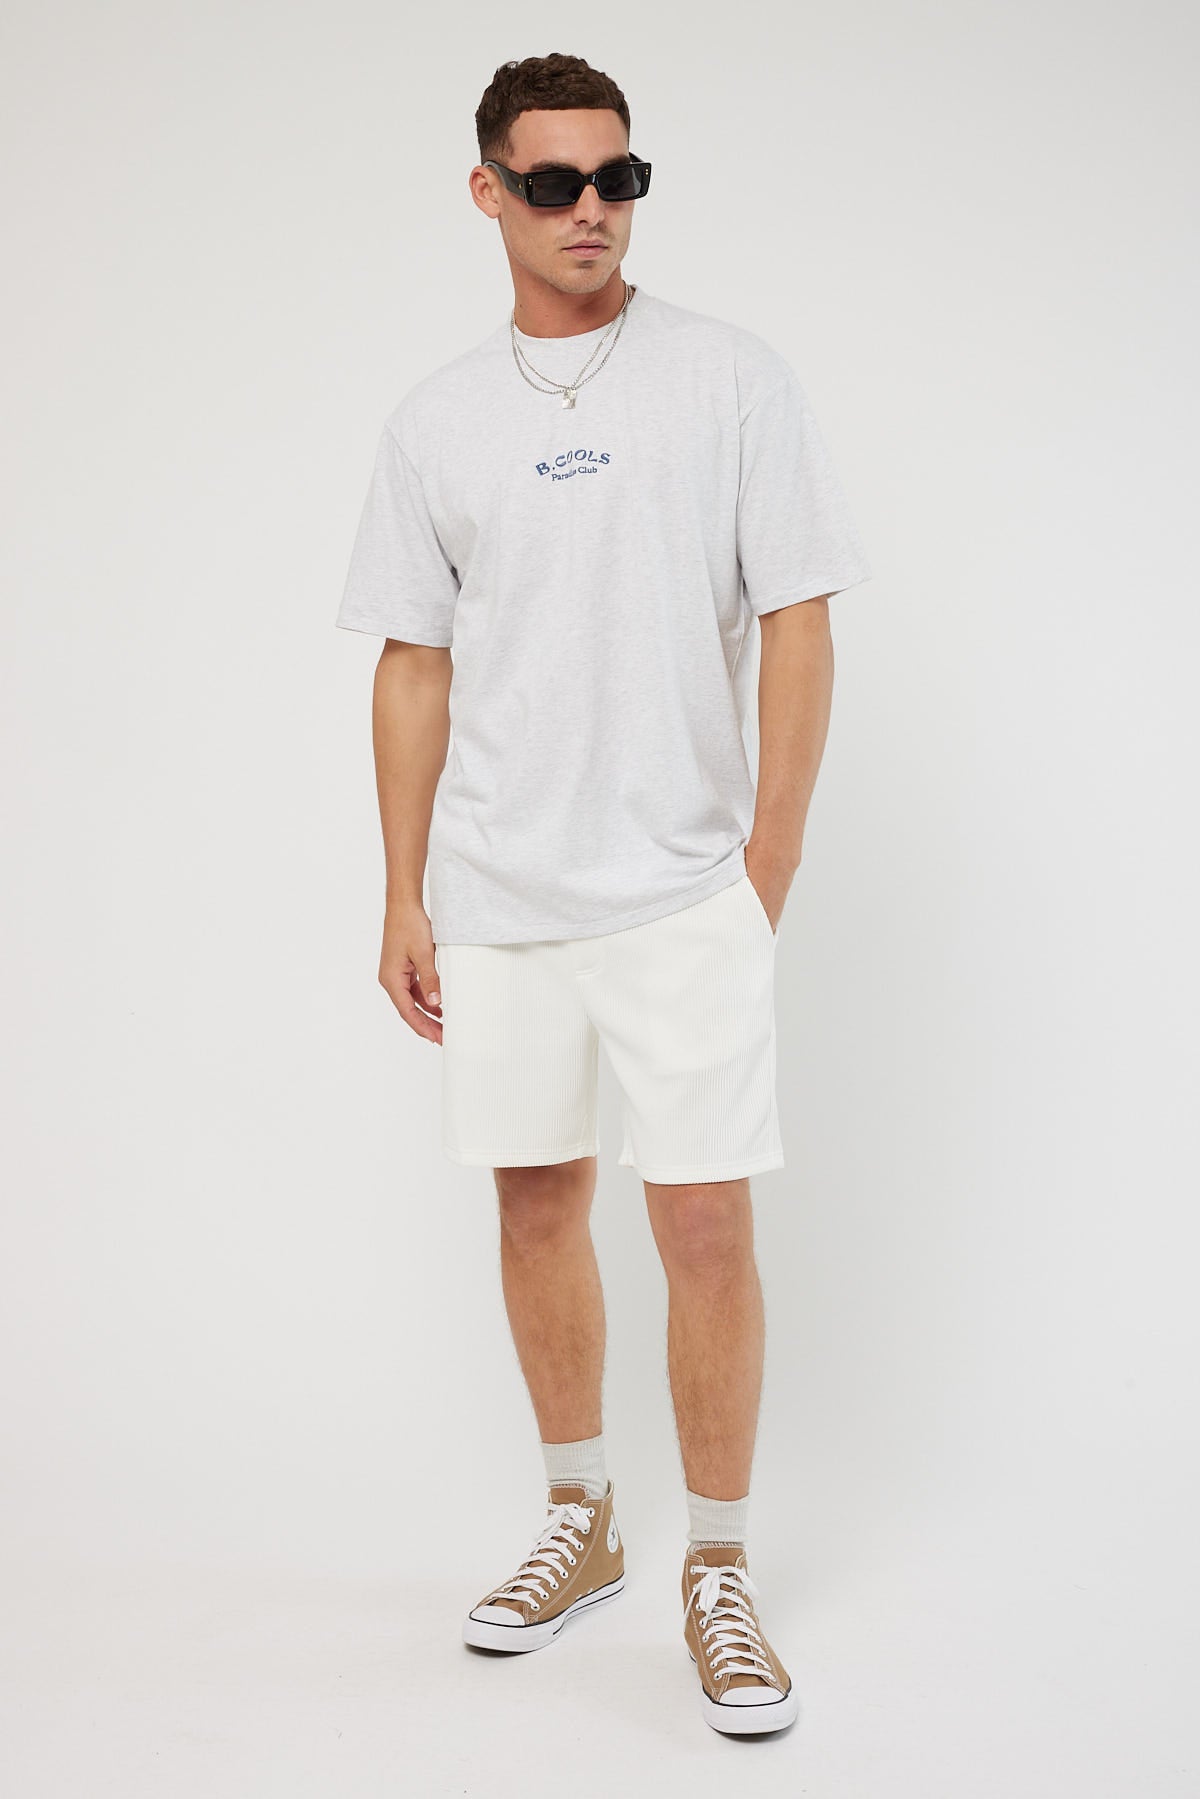 Barney Cools Arch Tee Snow Marle